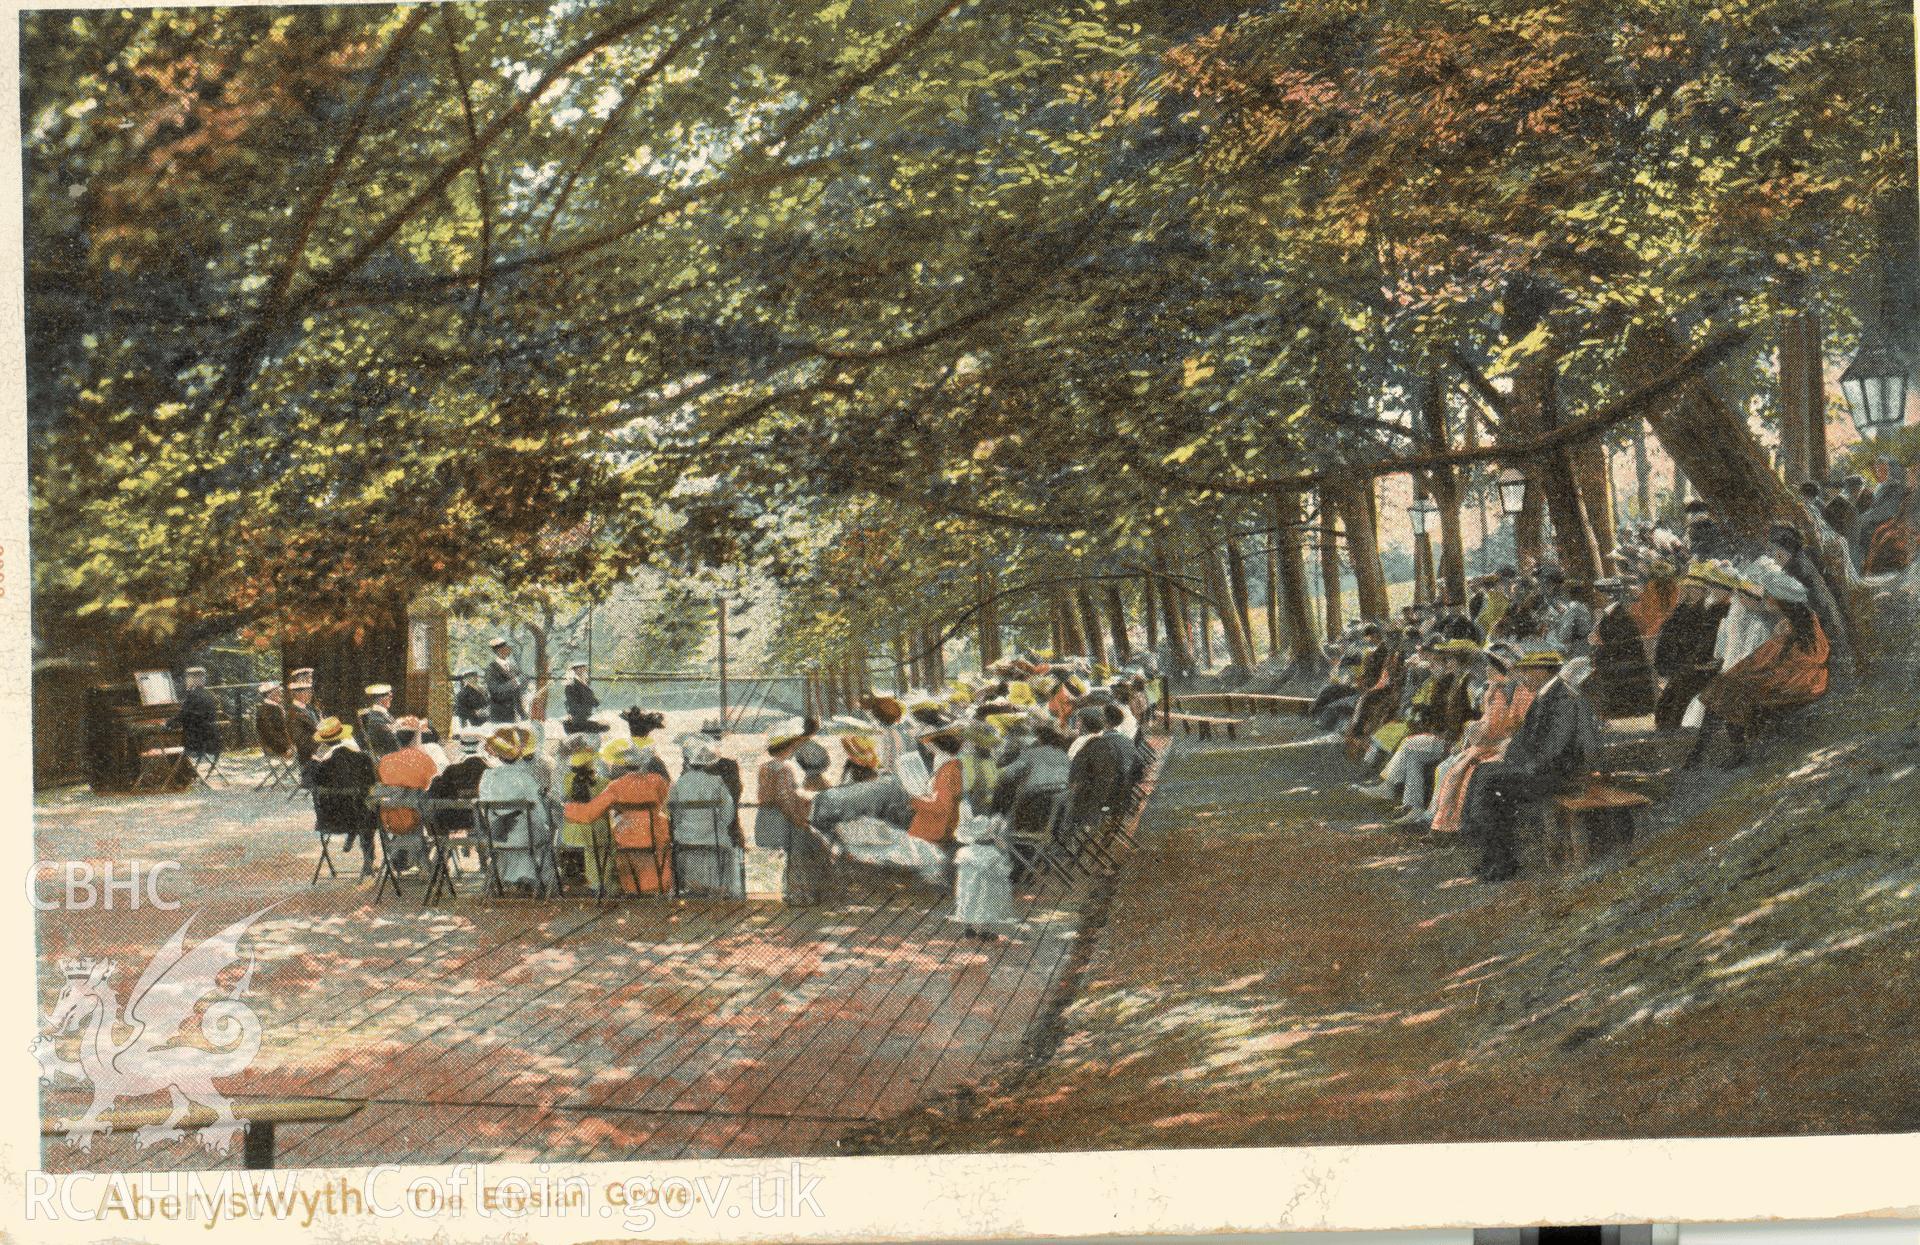 Digitised postcard image of the Elysian Grove, Aberystwyth, The Pictorial Stationery Co. Ltd., London. Produced by Parks and Gardens Data Services, from an original item in the Peter Davis Collection at Parks and Gardens UK. We hold only web-resolution images of this collection, suitable for viewing on screen and for research purposes only. We do not hold the original images, or publication quality scans.